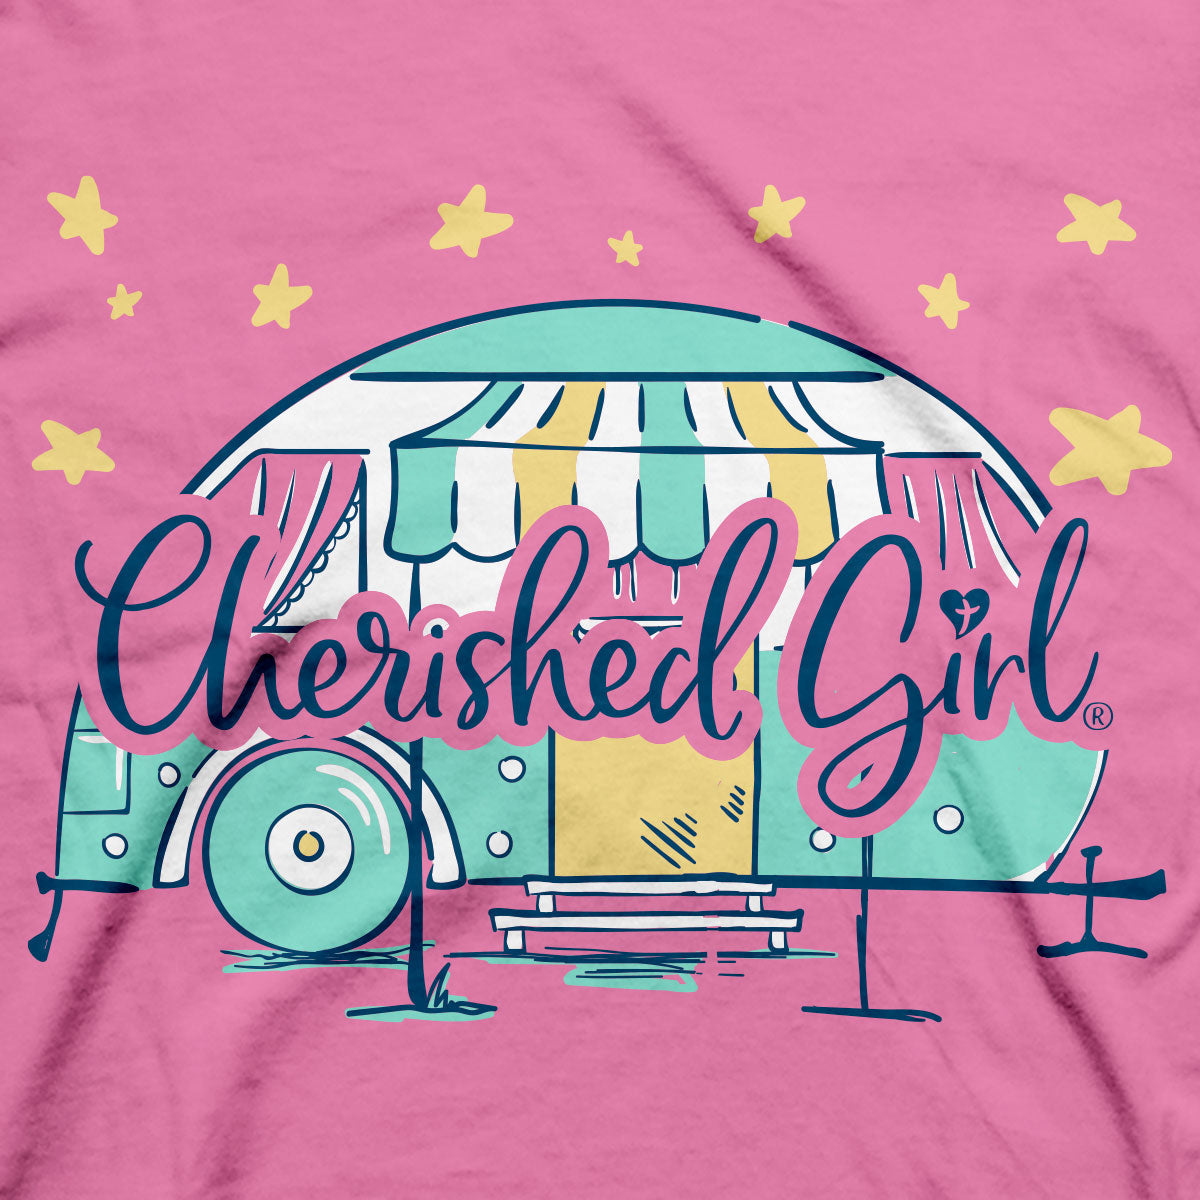 Cherished Girl Womens T-Shirt Camping With Jesus